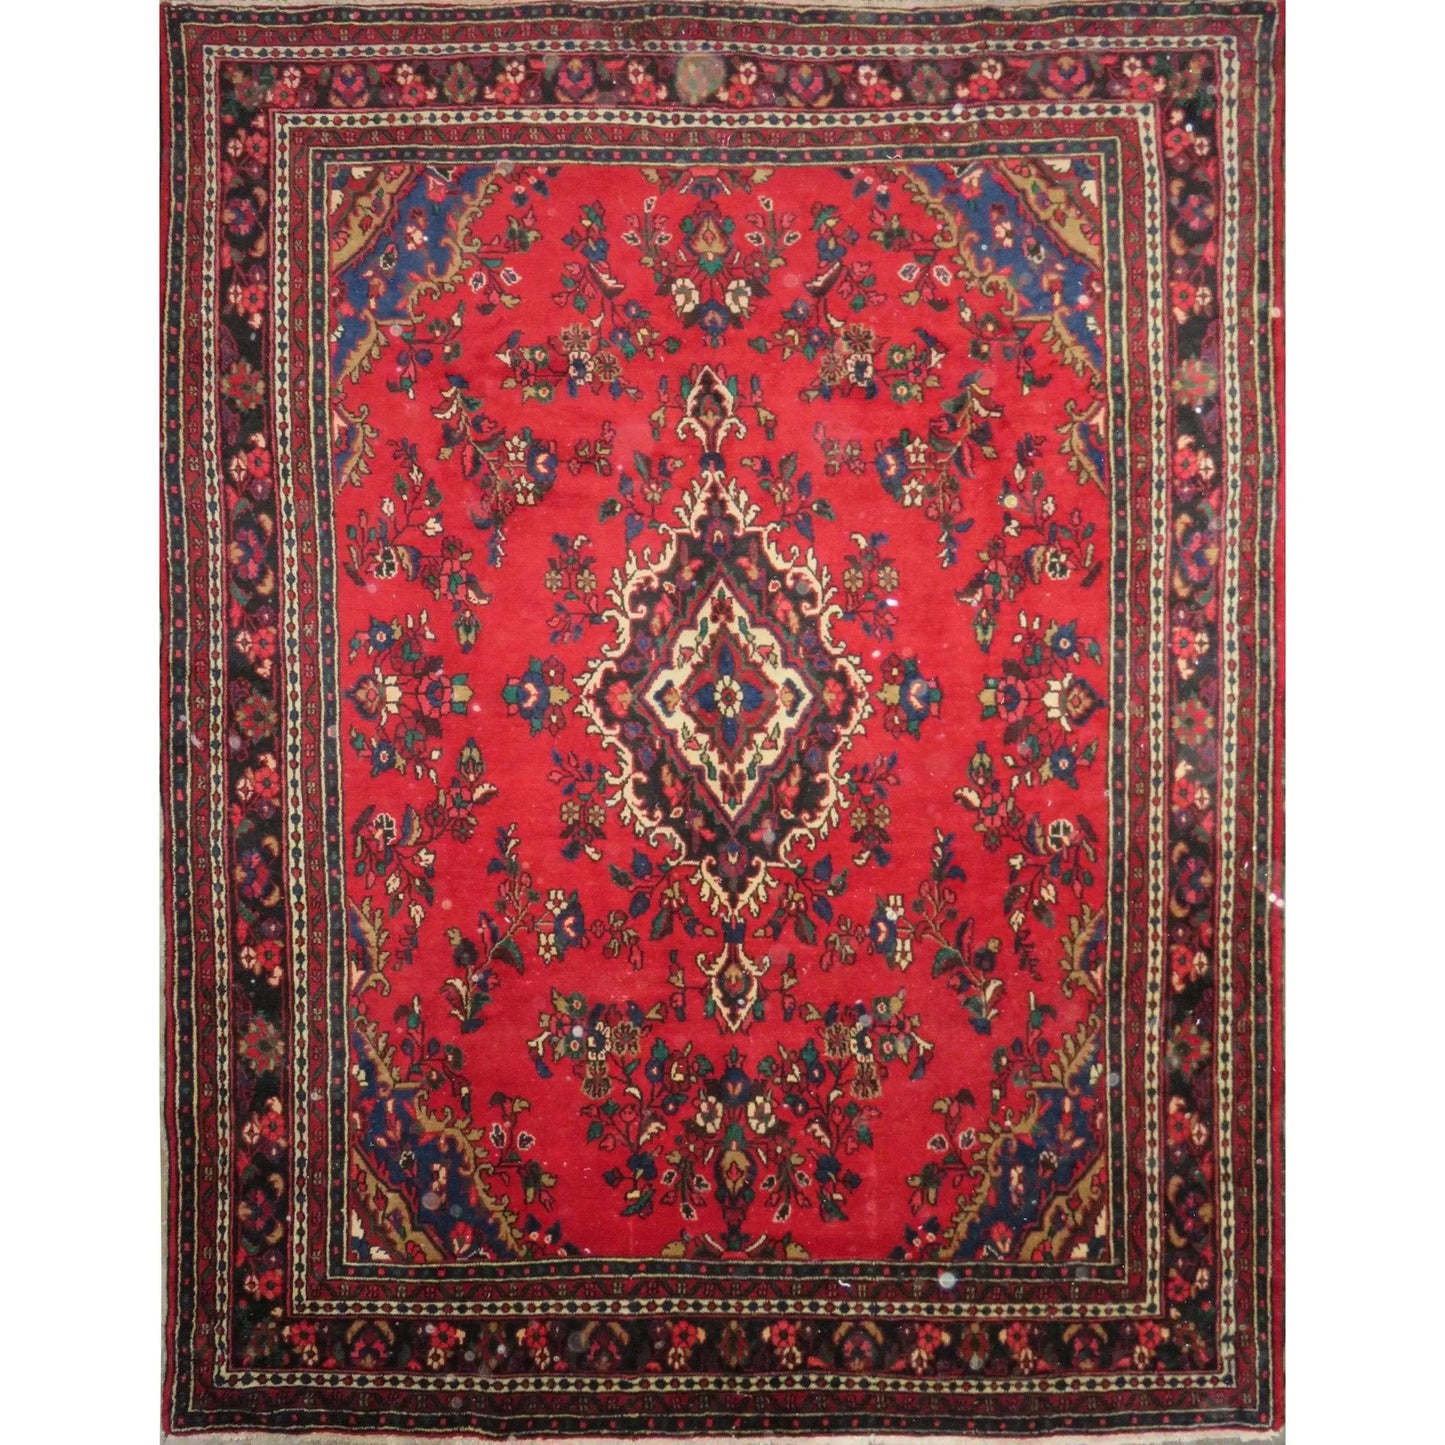 Hand-Knotted Persian Wool Rug _ Luxurious Vintage Design, 10'6" x 8'1", Artisan Crafted